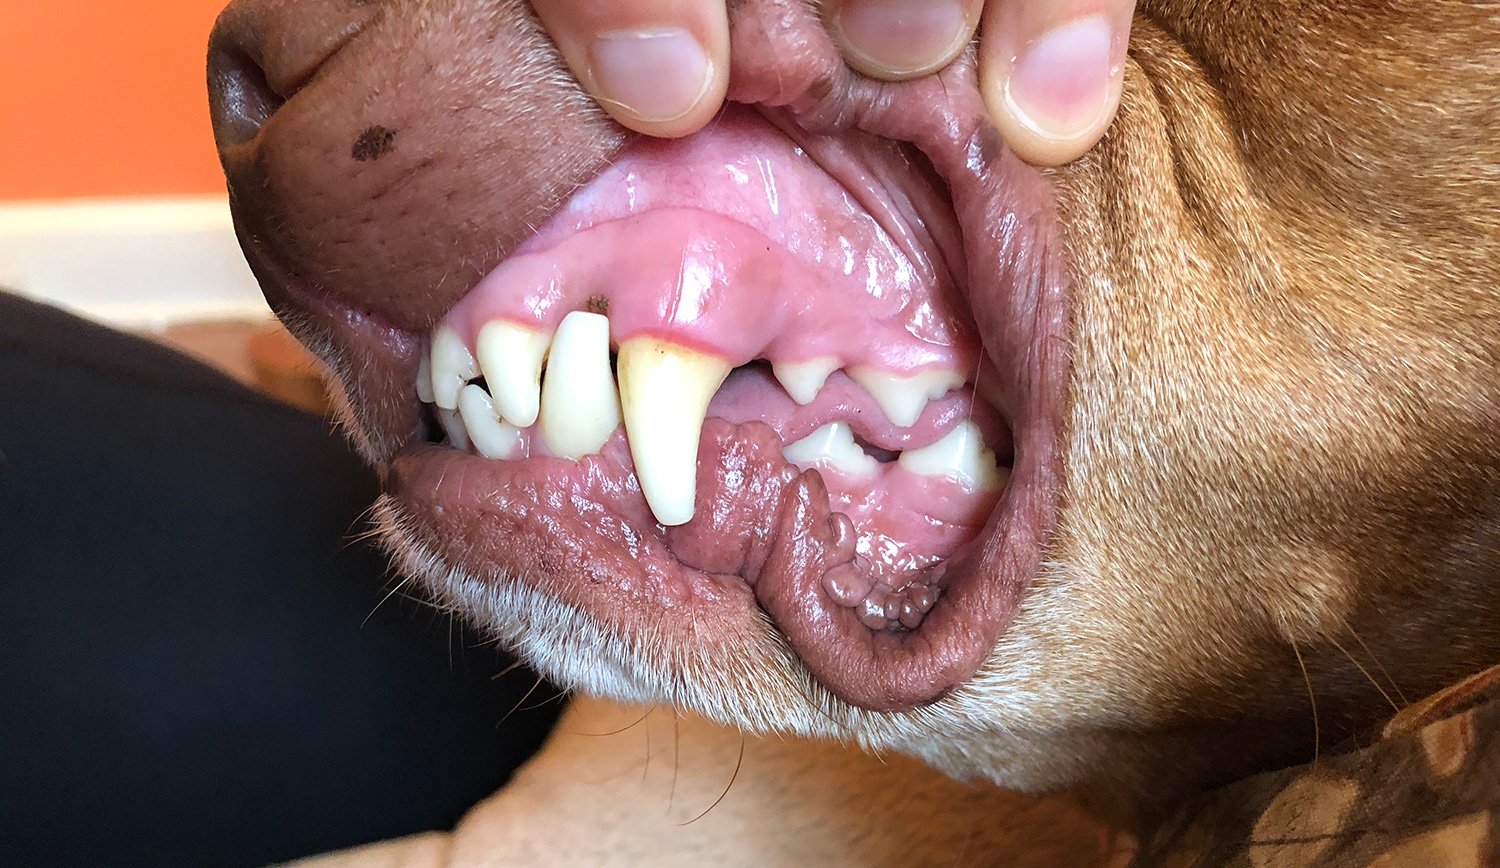 Zara's teeth after eating a raw diet for 4 years